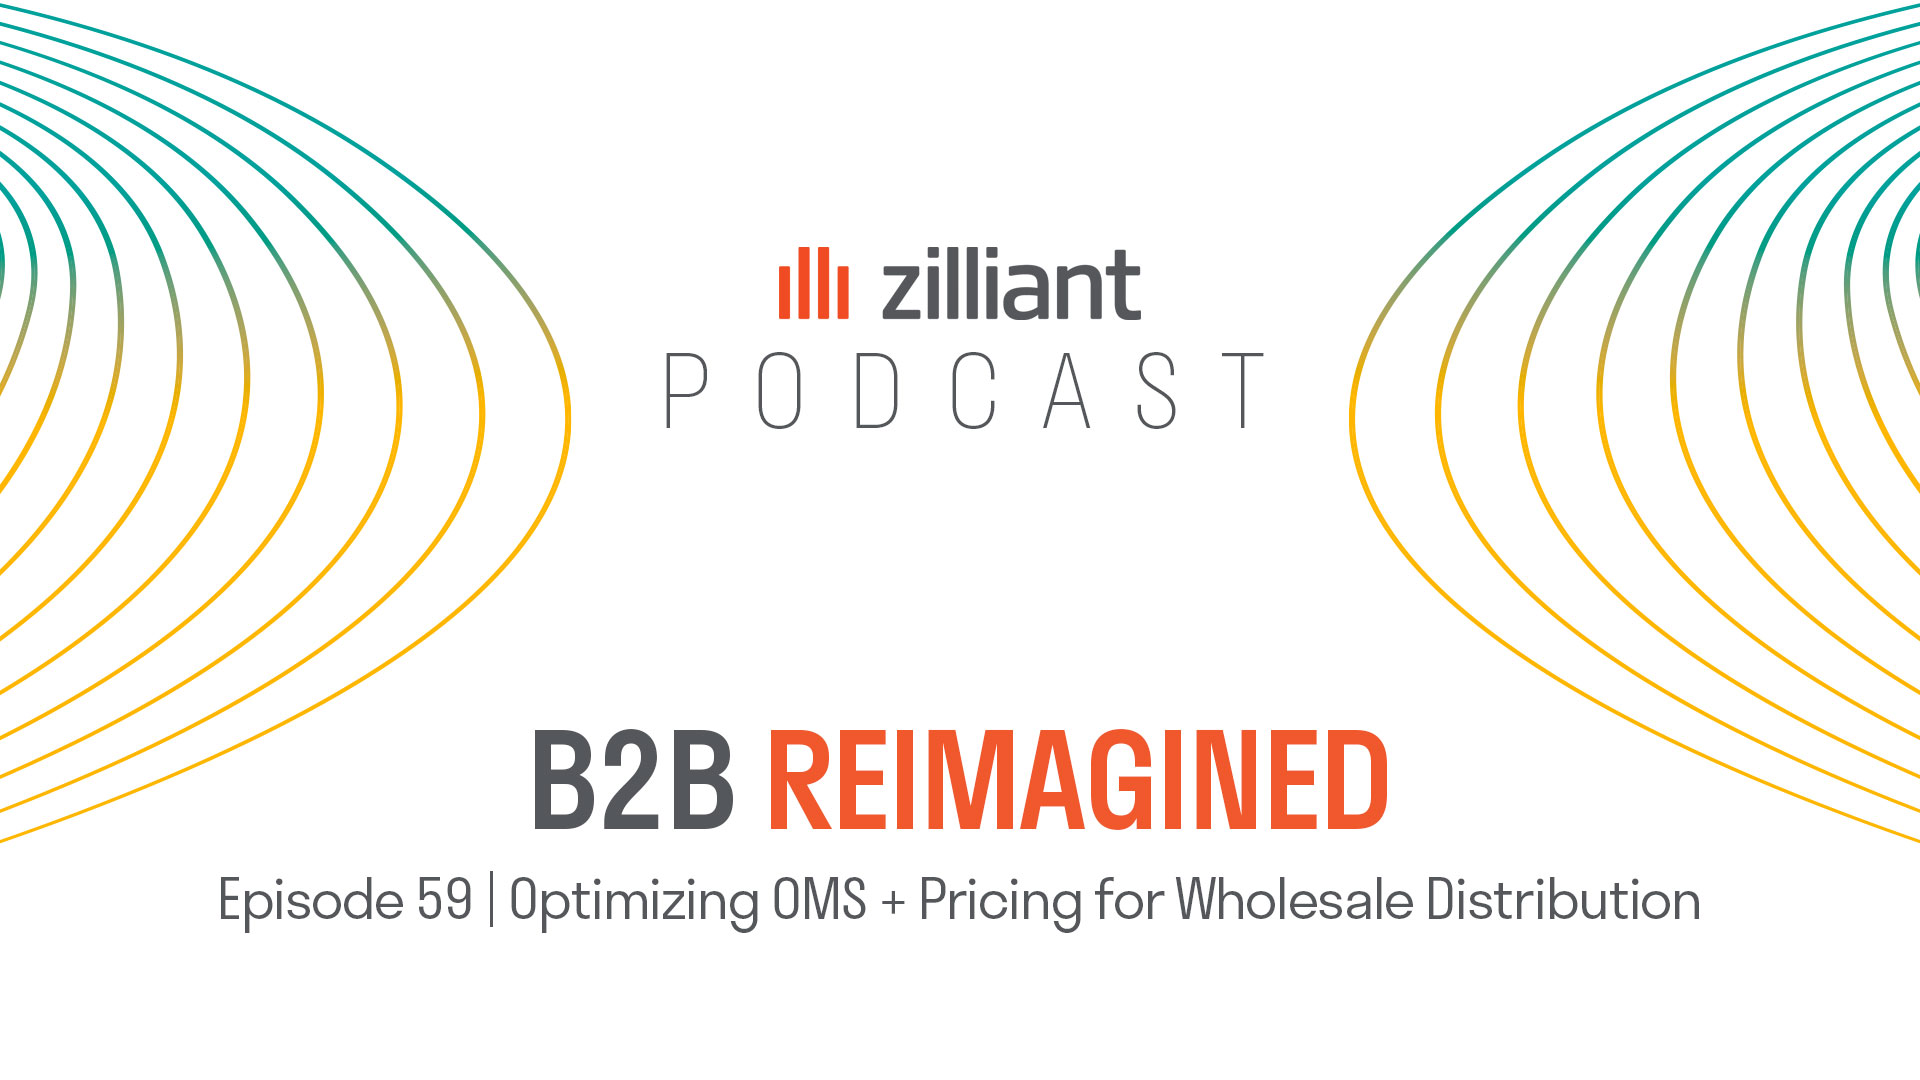 Optimizing OMS + Pricing for Wholesale Distribution